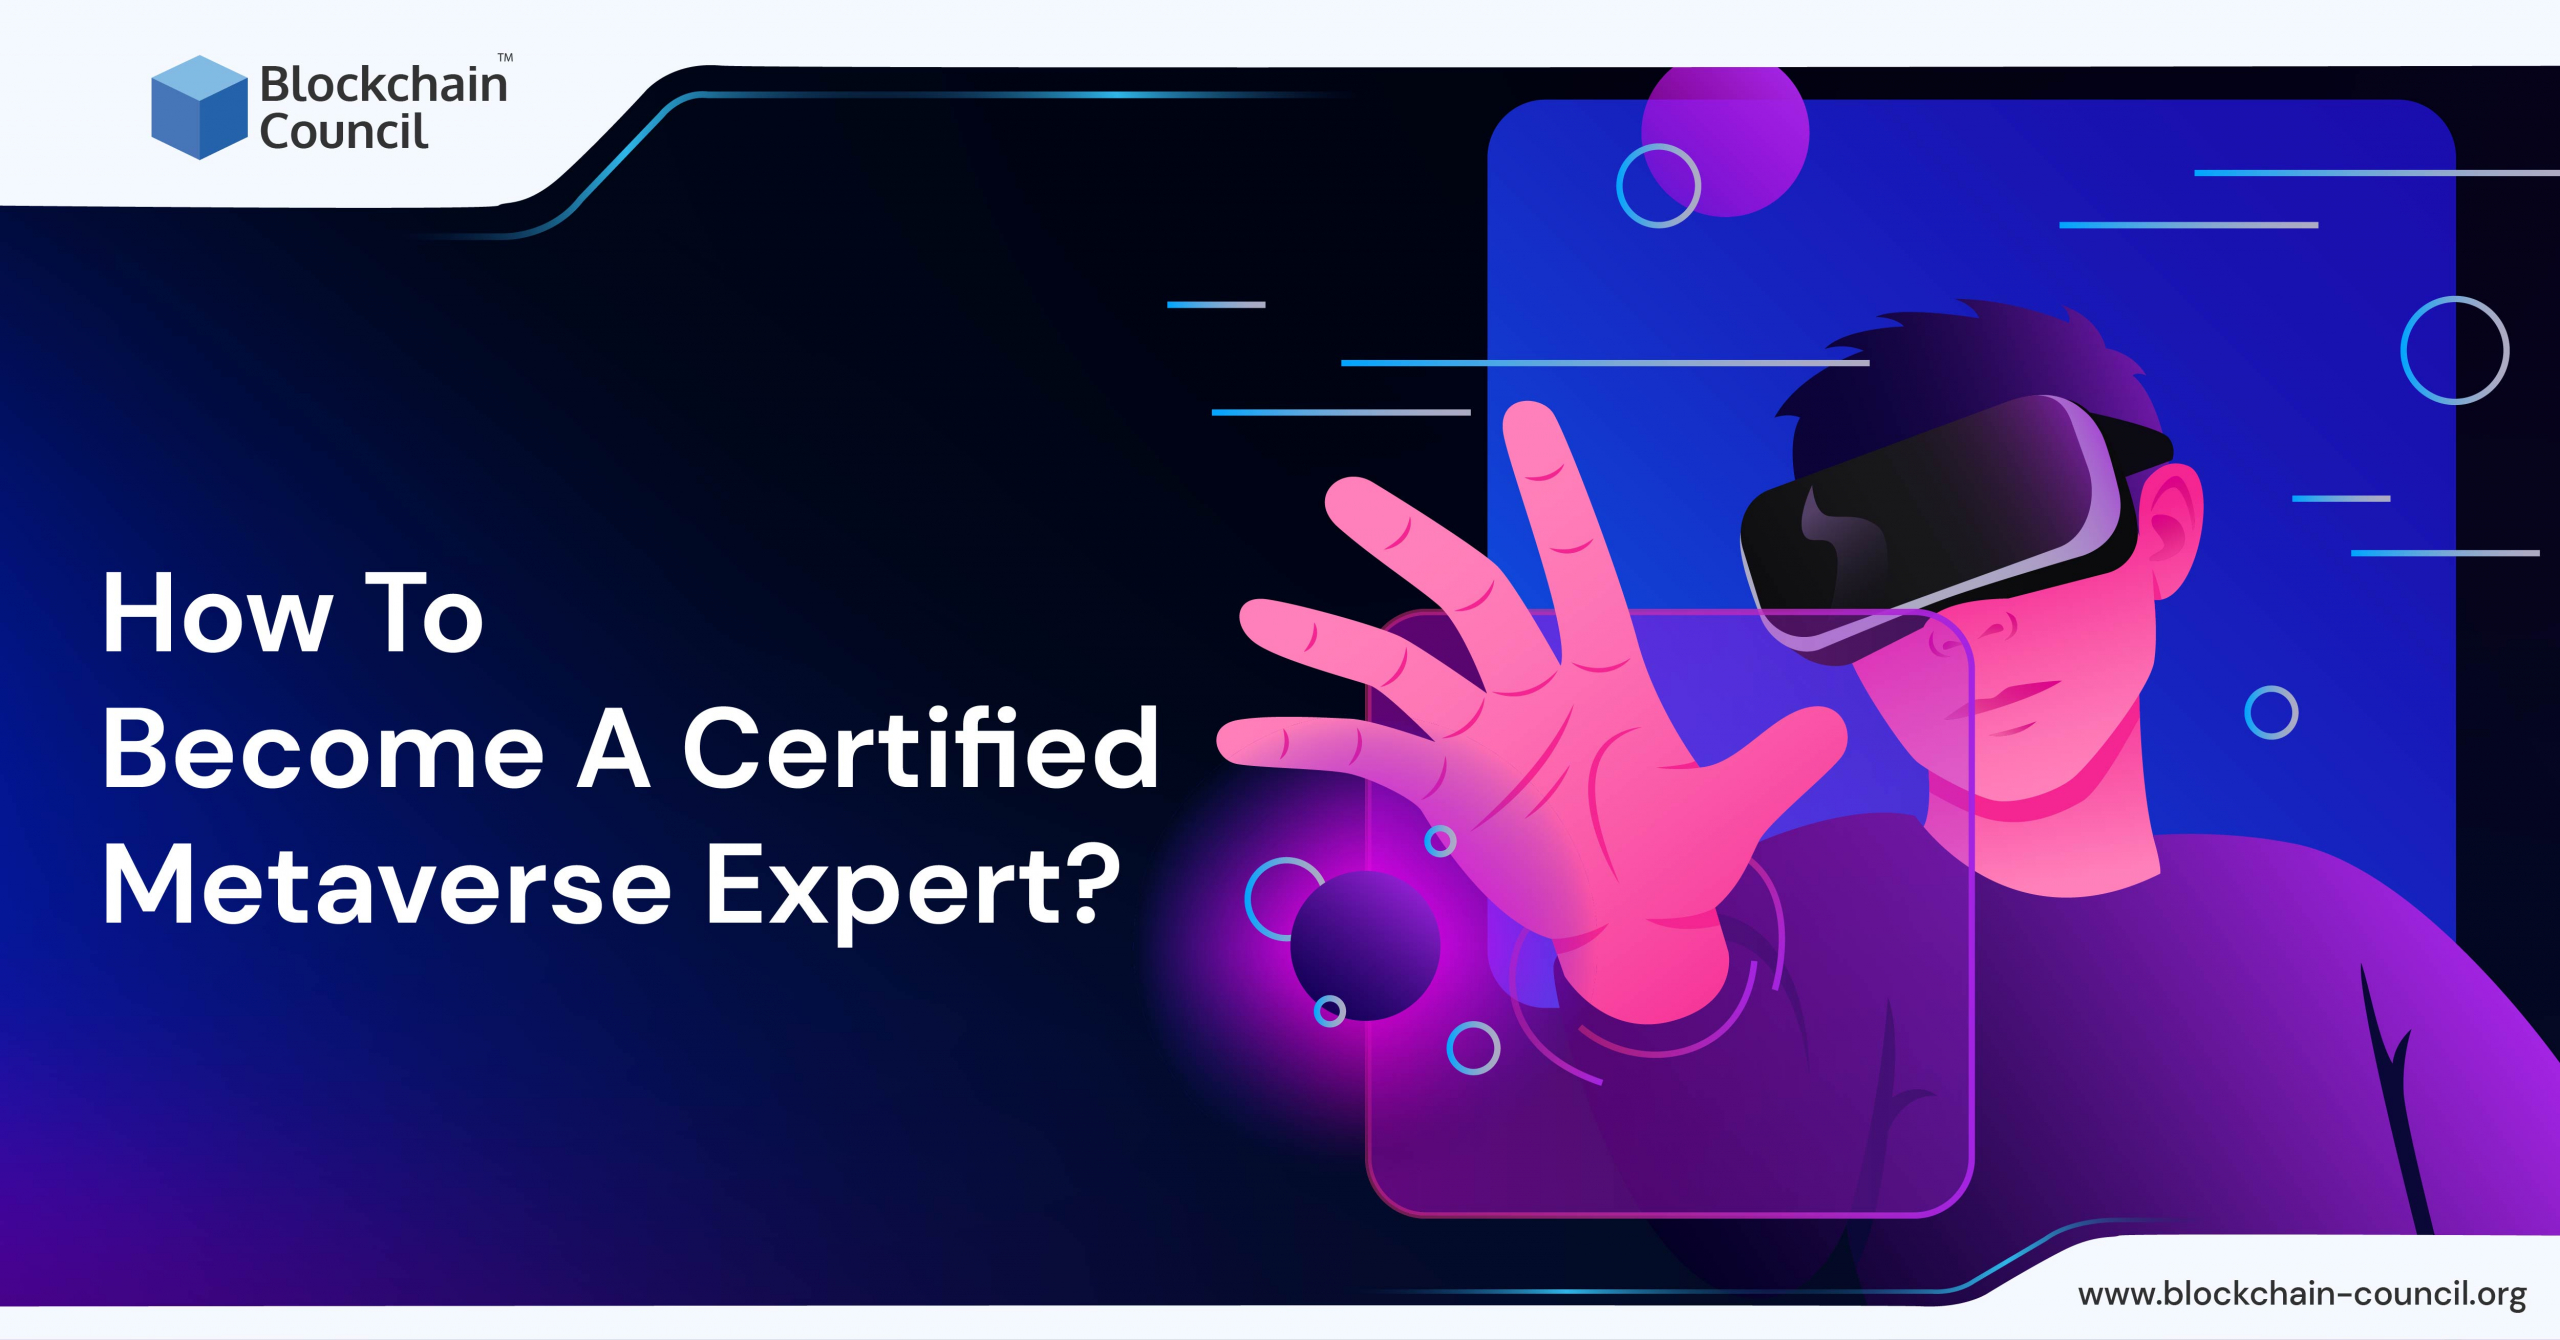 How To Become a Certified Metaverse Expert?